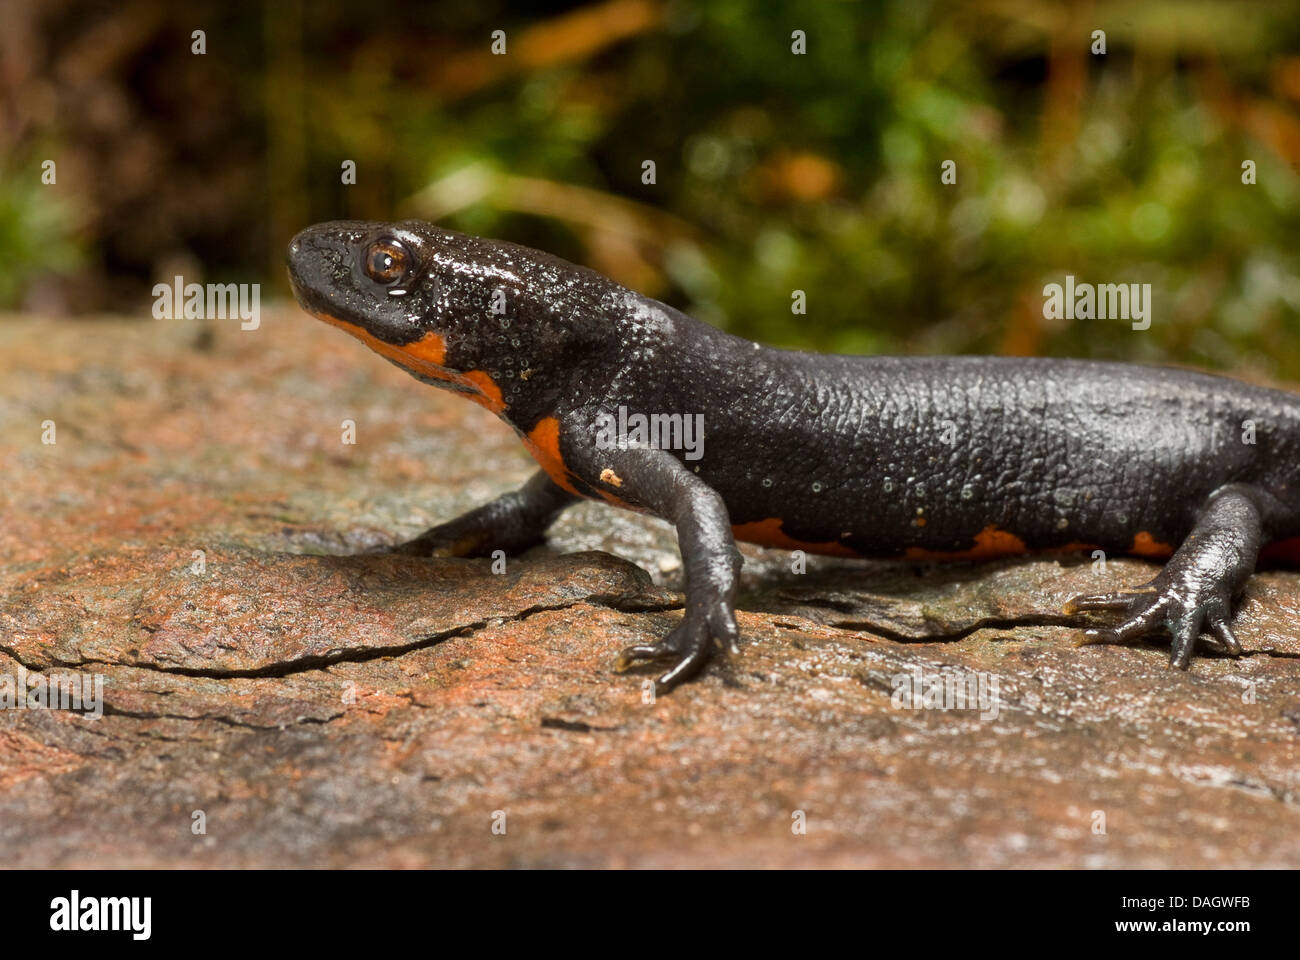 Chinese dwarf newt, Chinese fire bellied newt (Cynops orientalis), on a stone Stock Photo